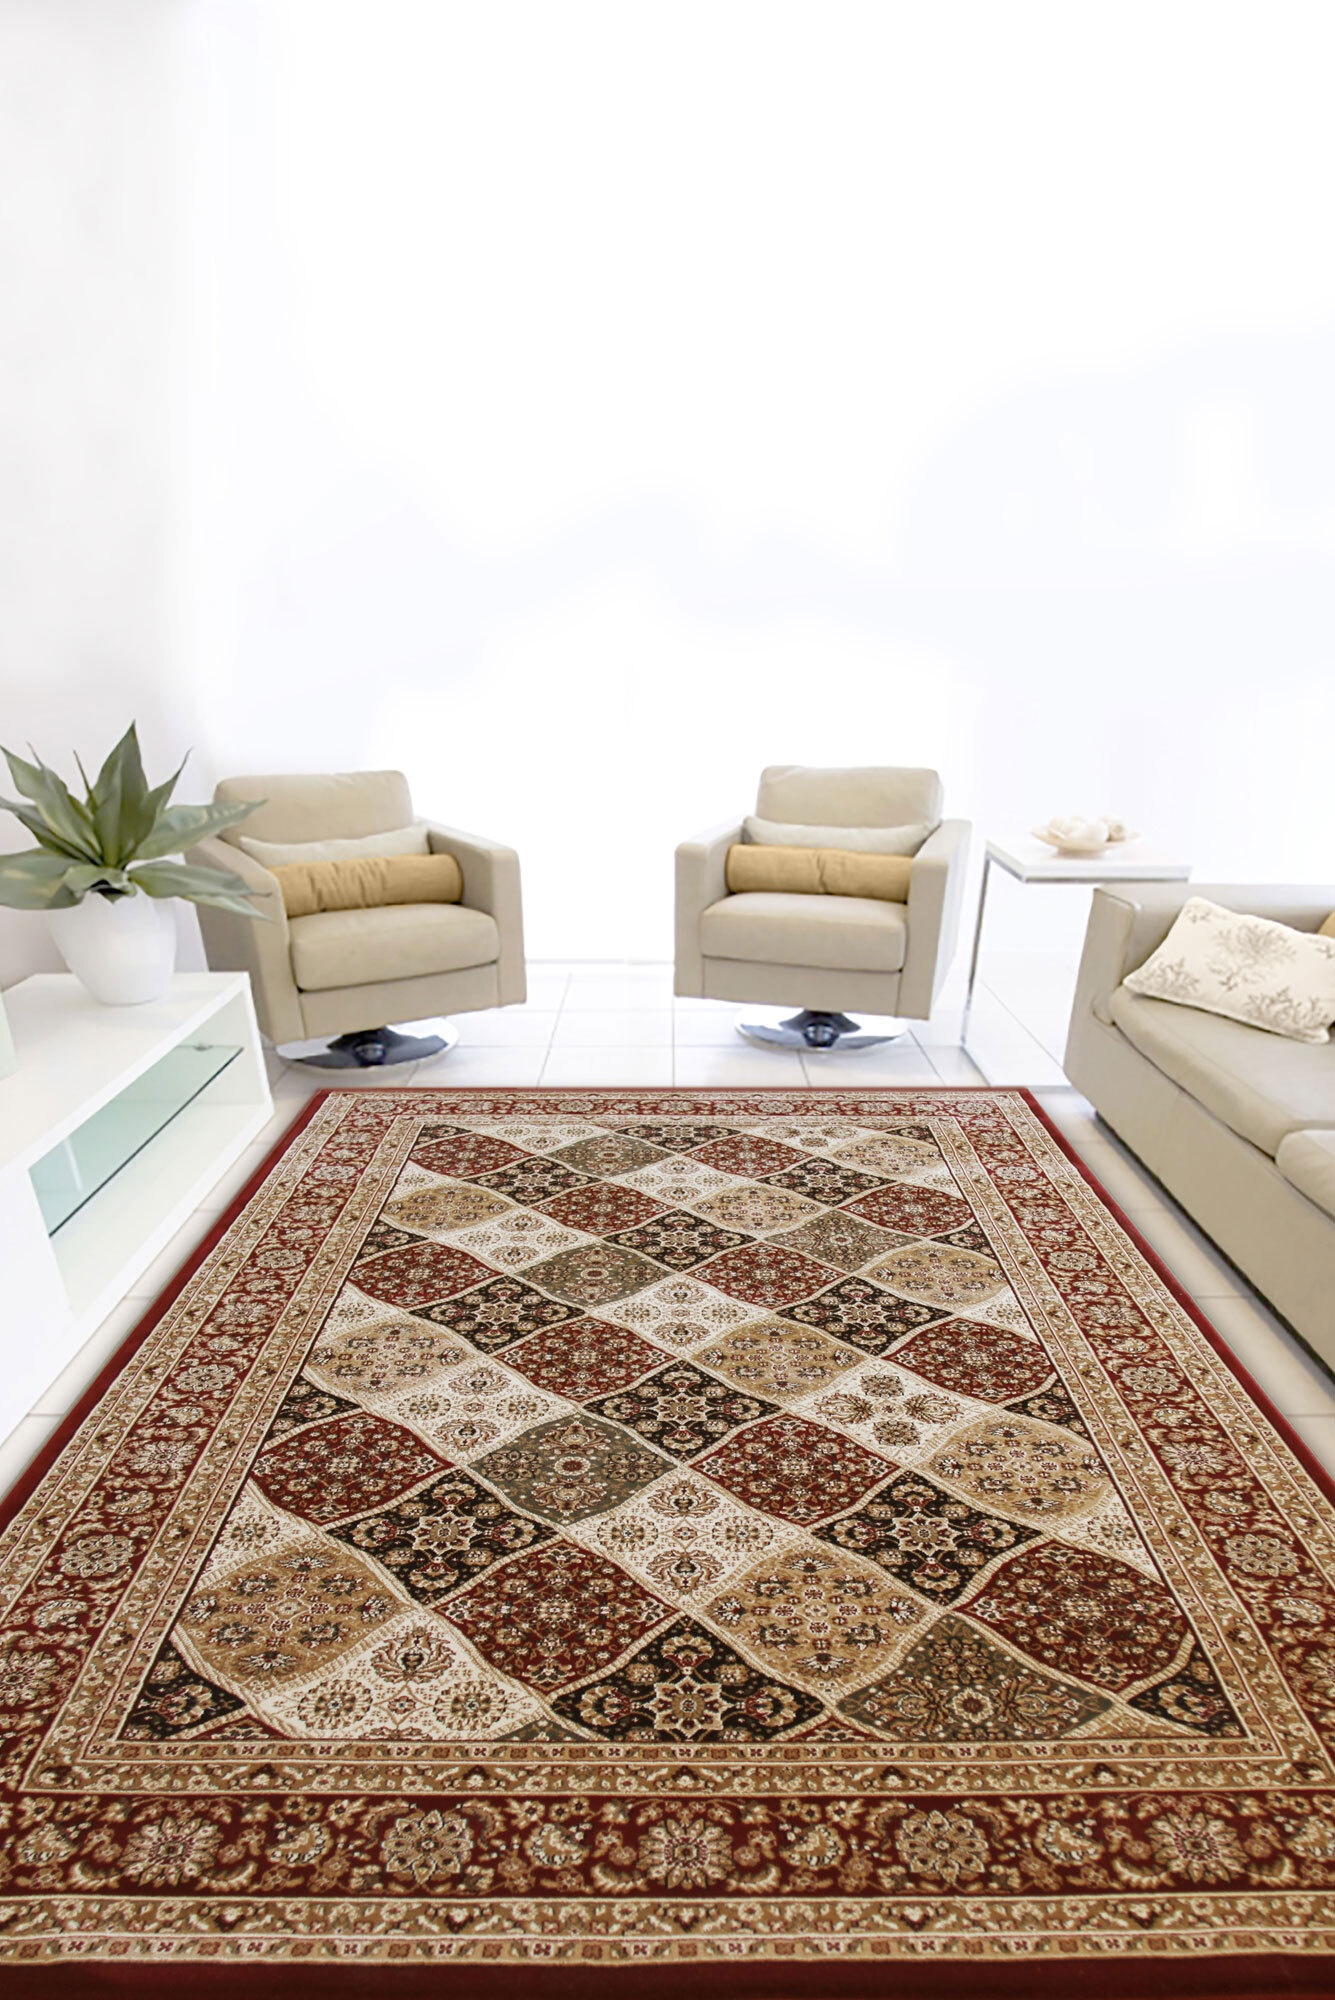 Star Classic Square Pattern Rug(Size 180 x 120cm)